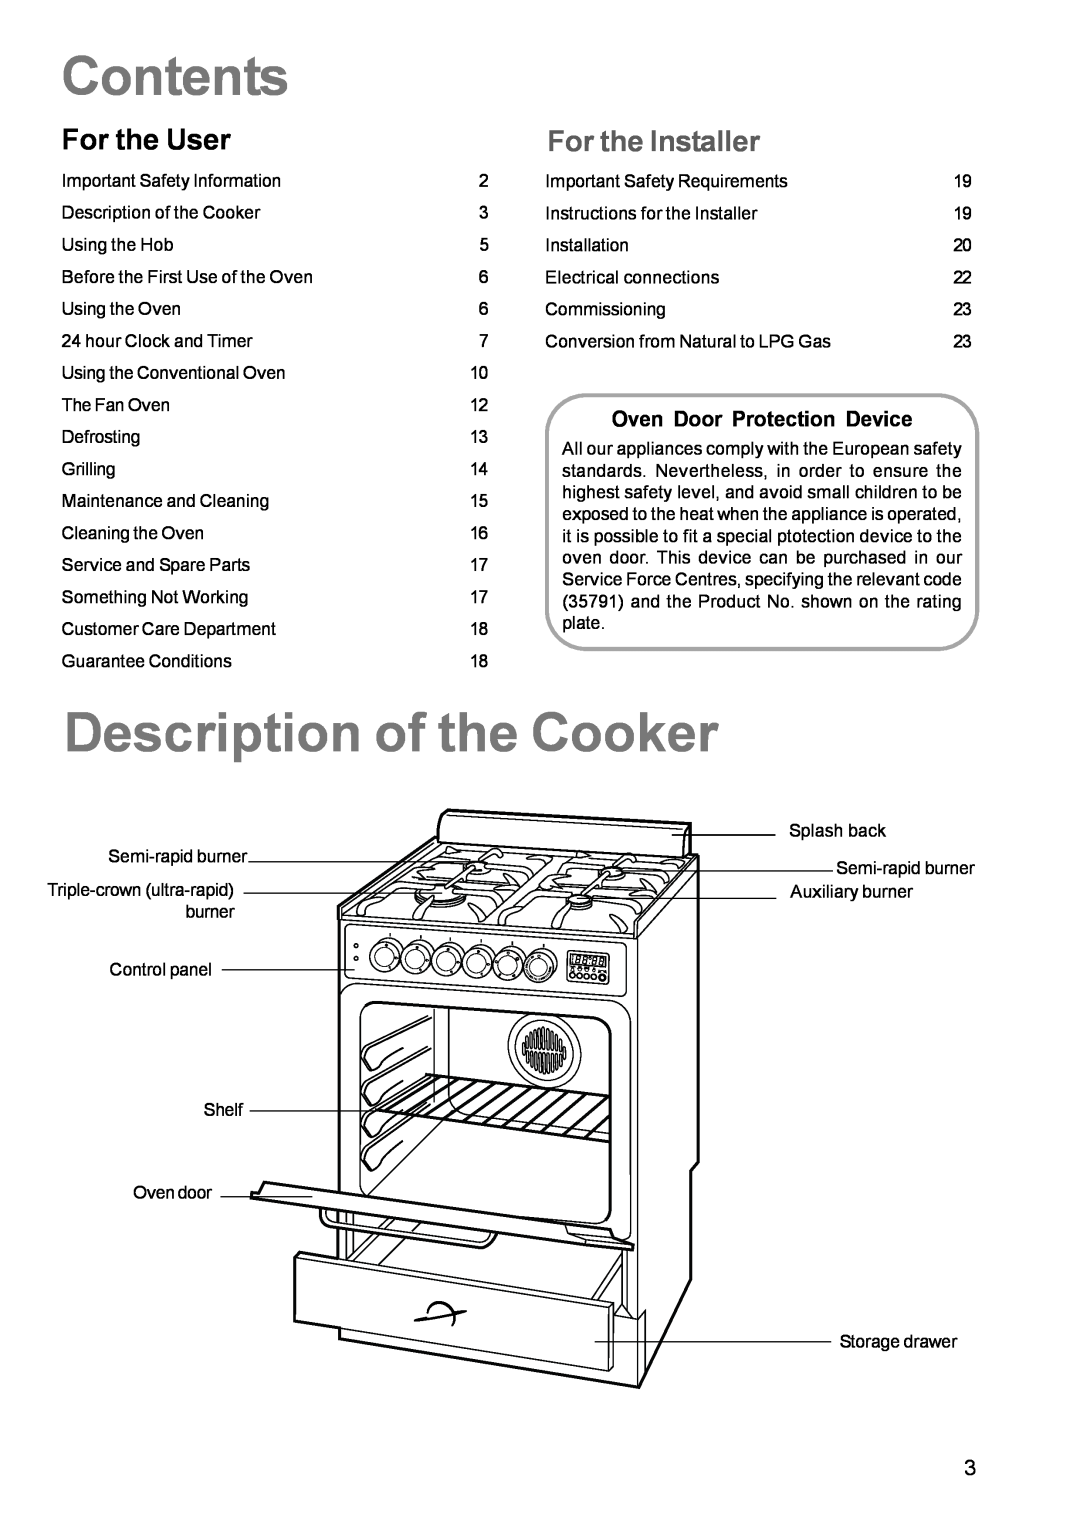 Zanussi ZCM 631 manual Contents, Description of the Cooker, For the User, Oven Door Protection Device, For the Installer 